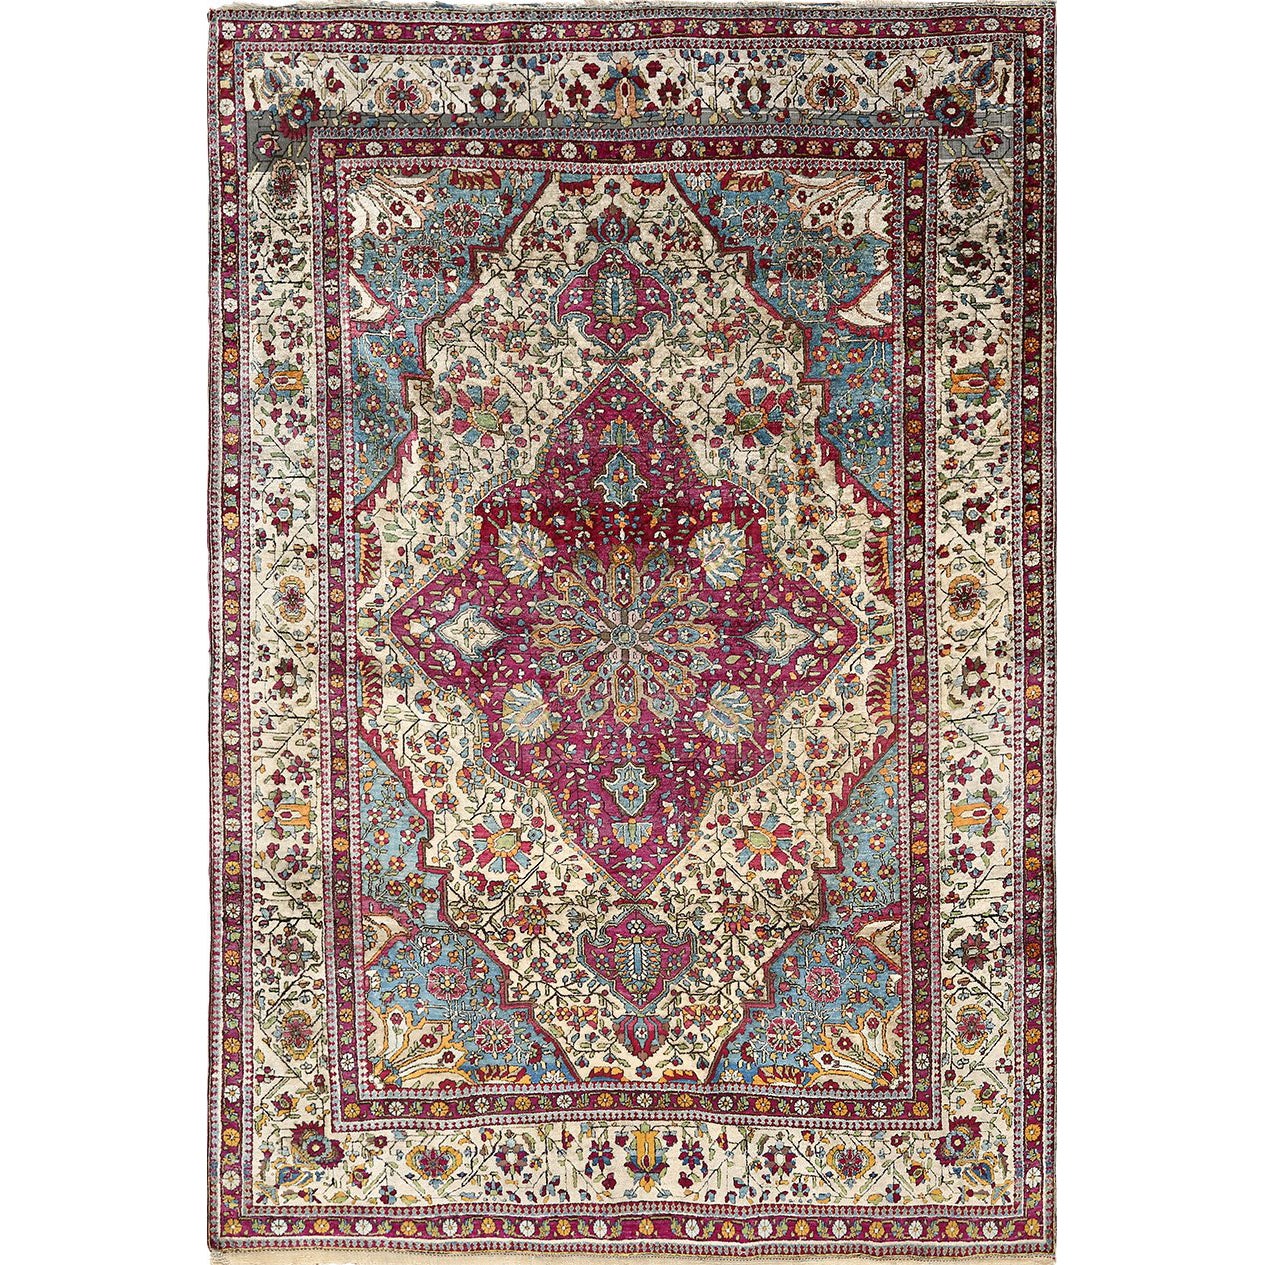 Antique Persian Kashan Rug 8ft.11in. x 12ft. 11in. For Sale at 1stDibs